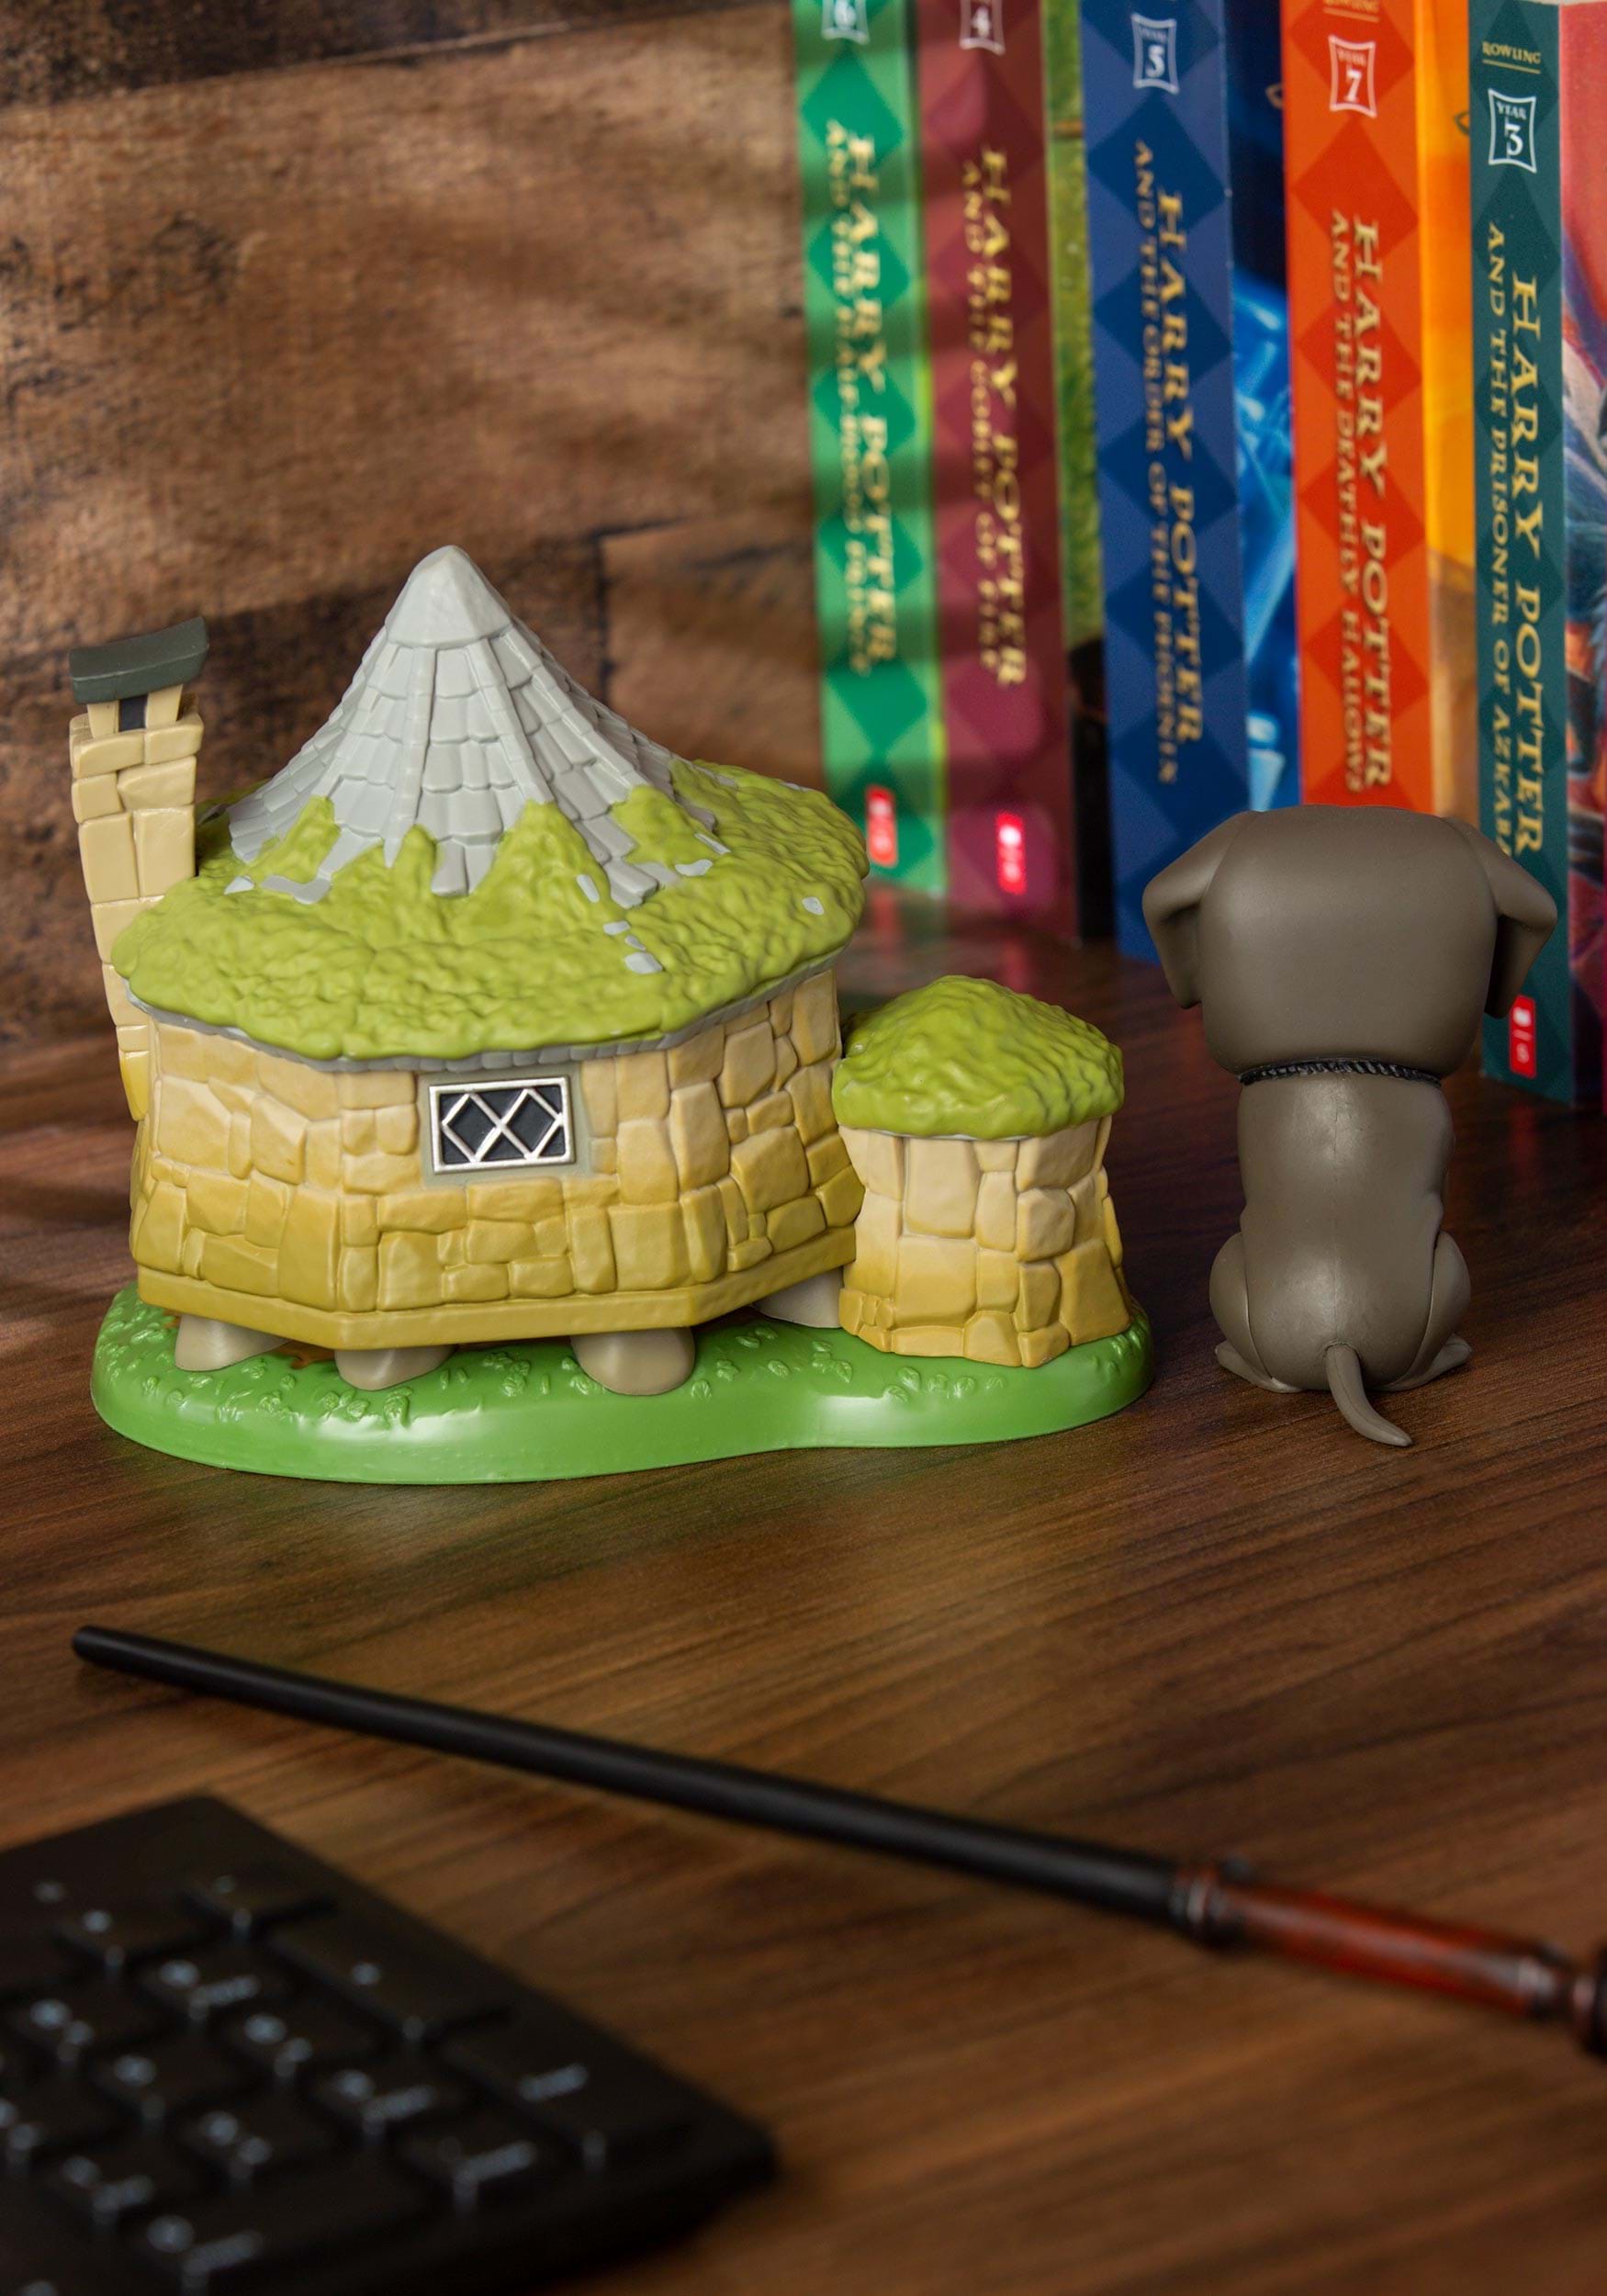 Funko Harry Potter Hagrid's Hut With Fang Pop Town Figure is Live